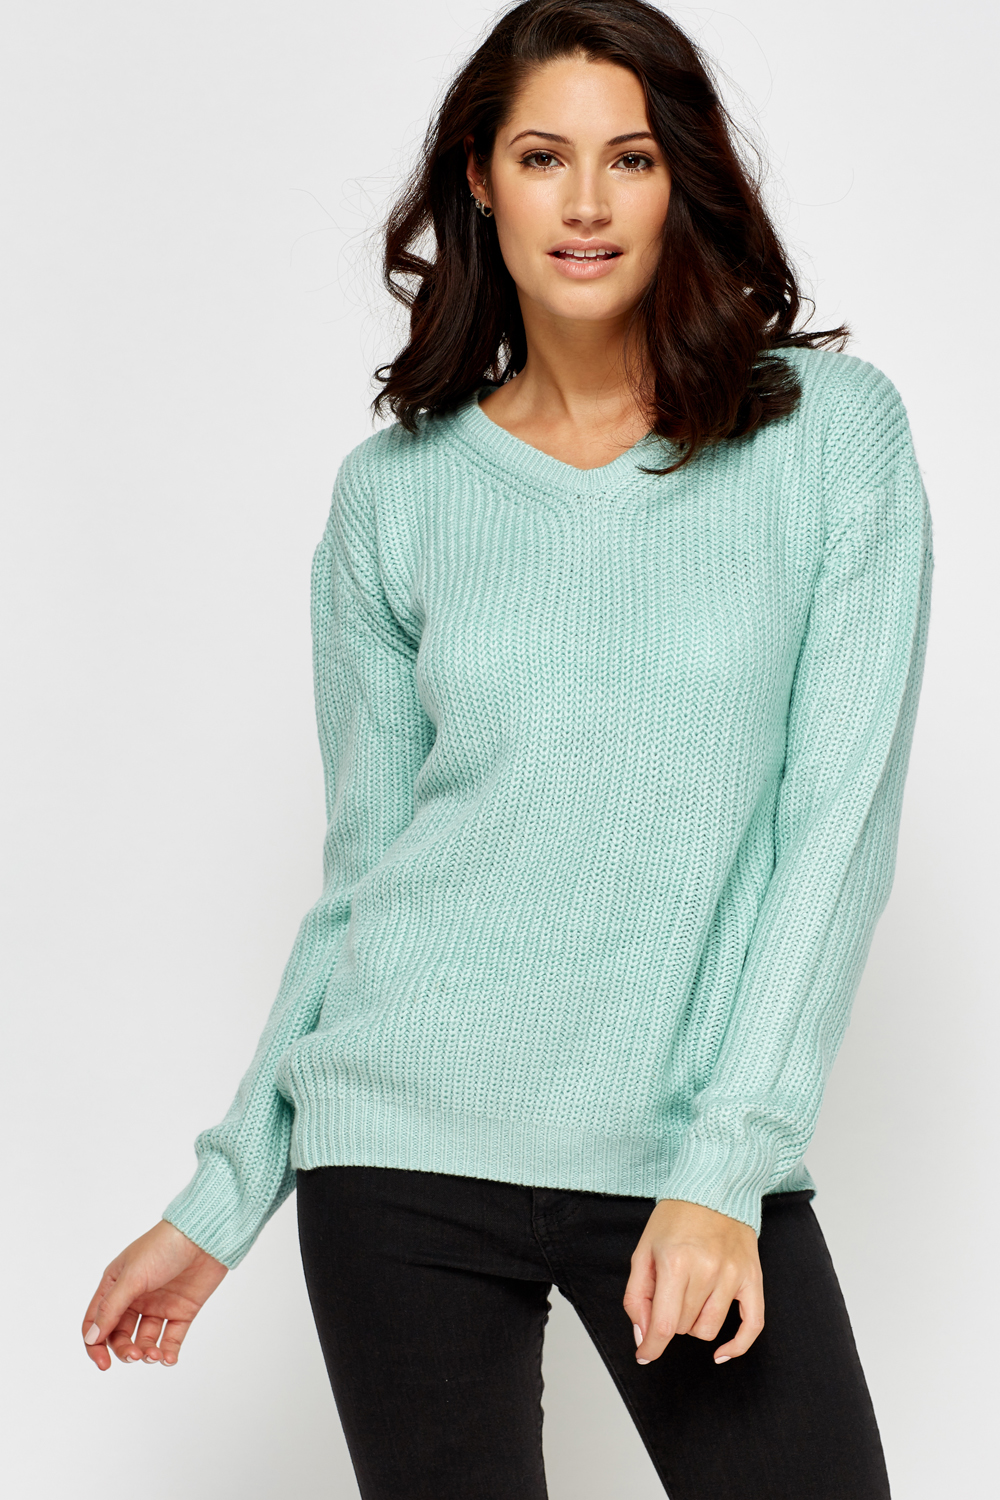 Mint Cable Knit Jumper - Just $7